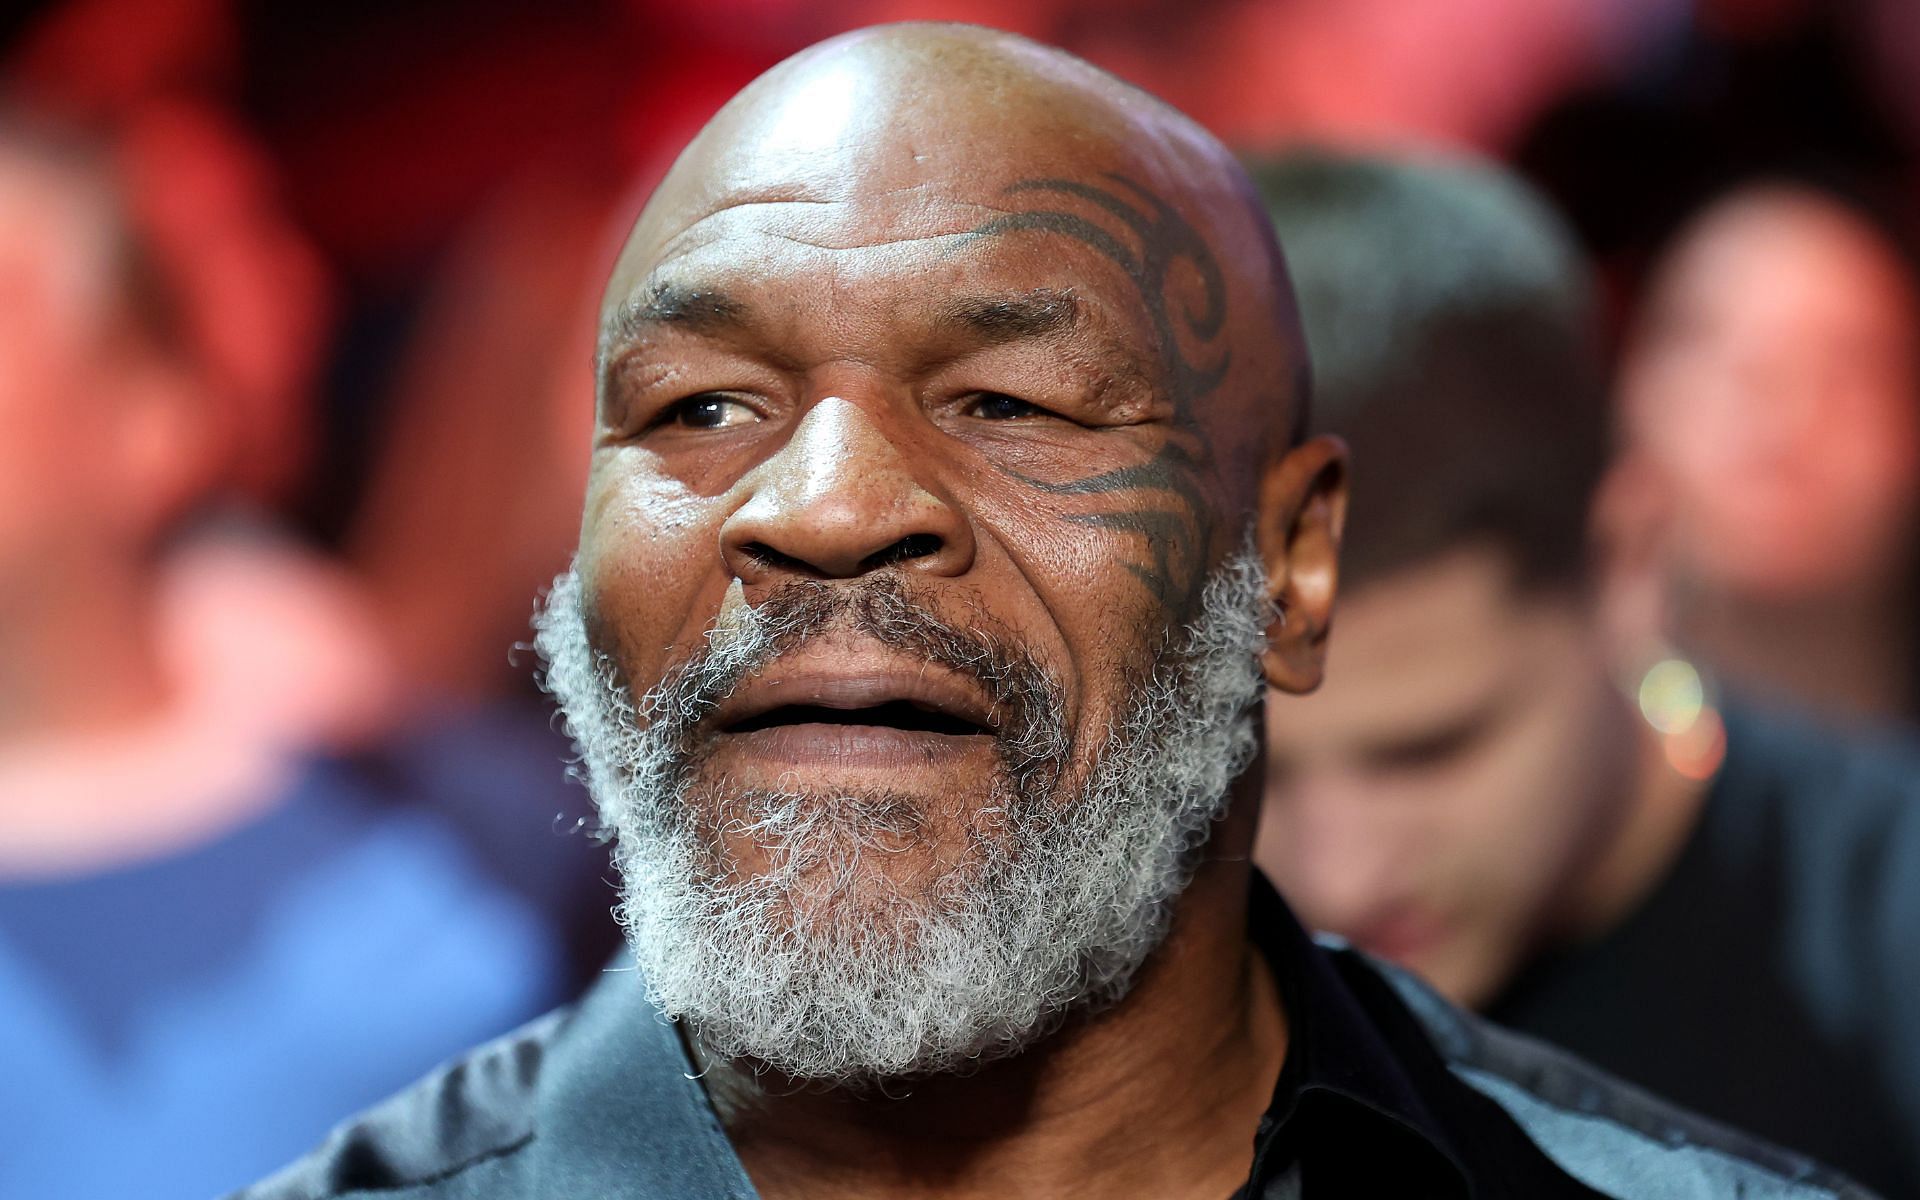 Mike Tyson dragged into 